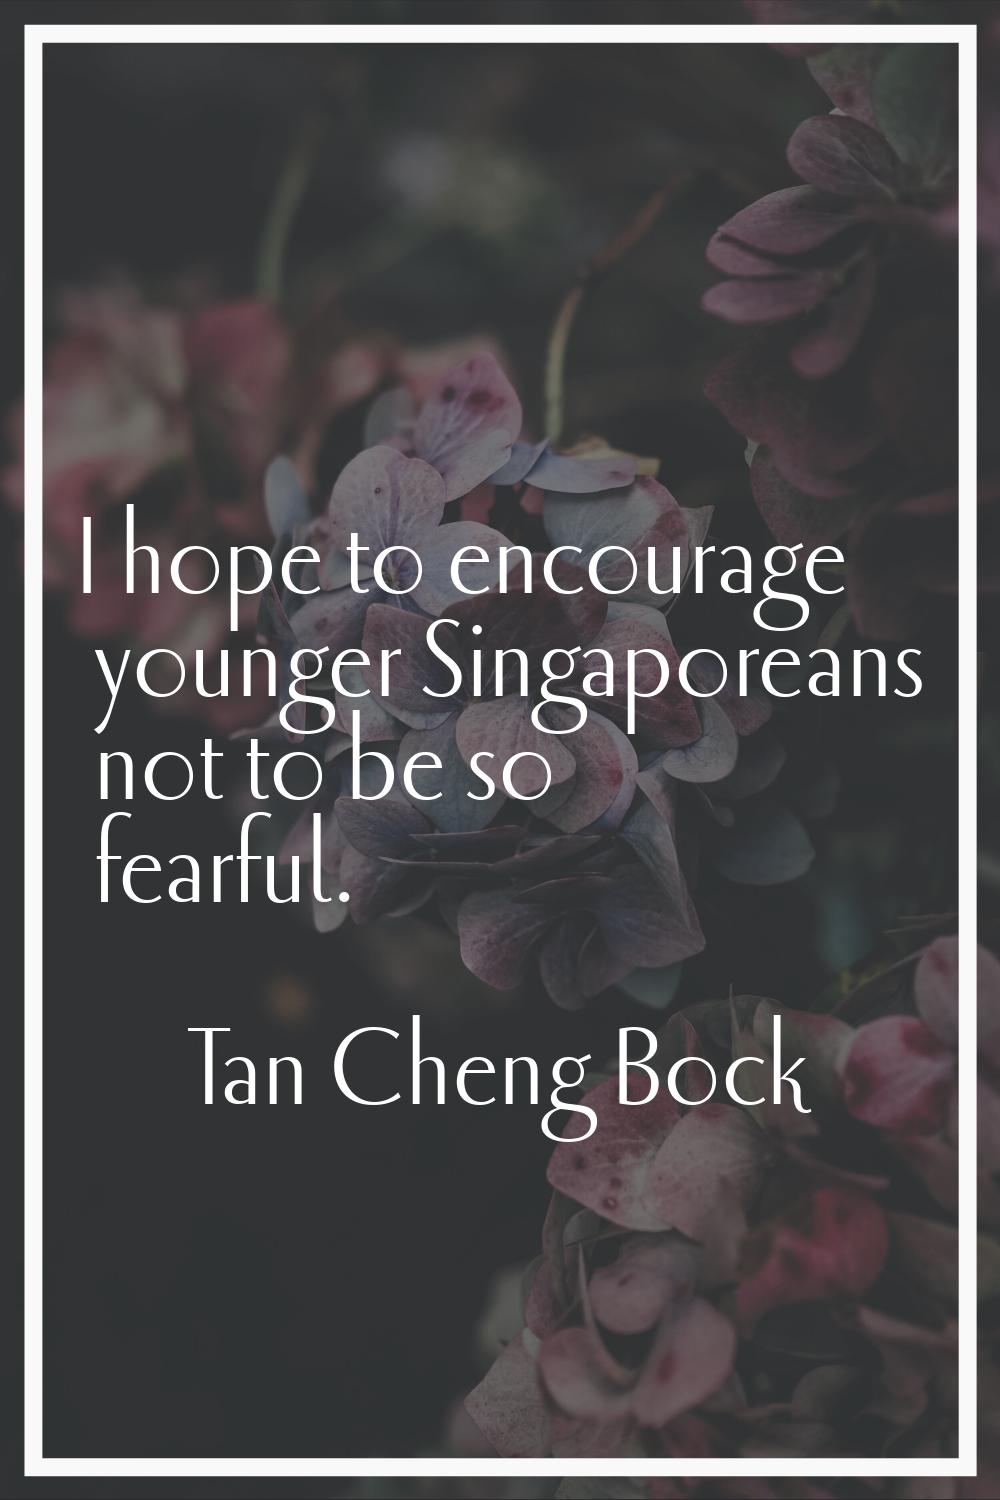 I hope to encourage younger Singaporeans not to be so fearful.